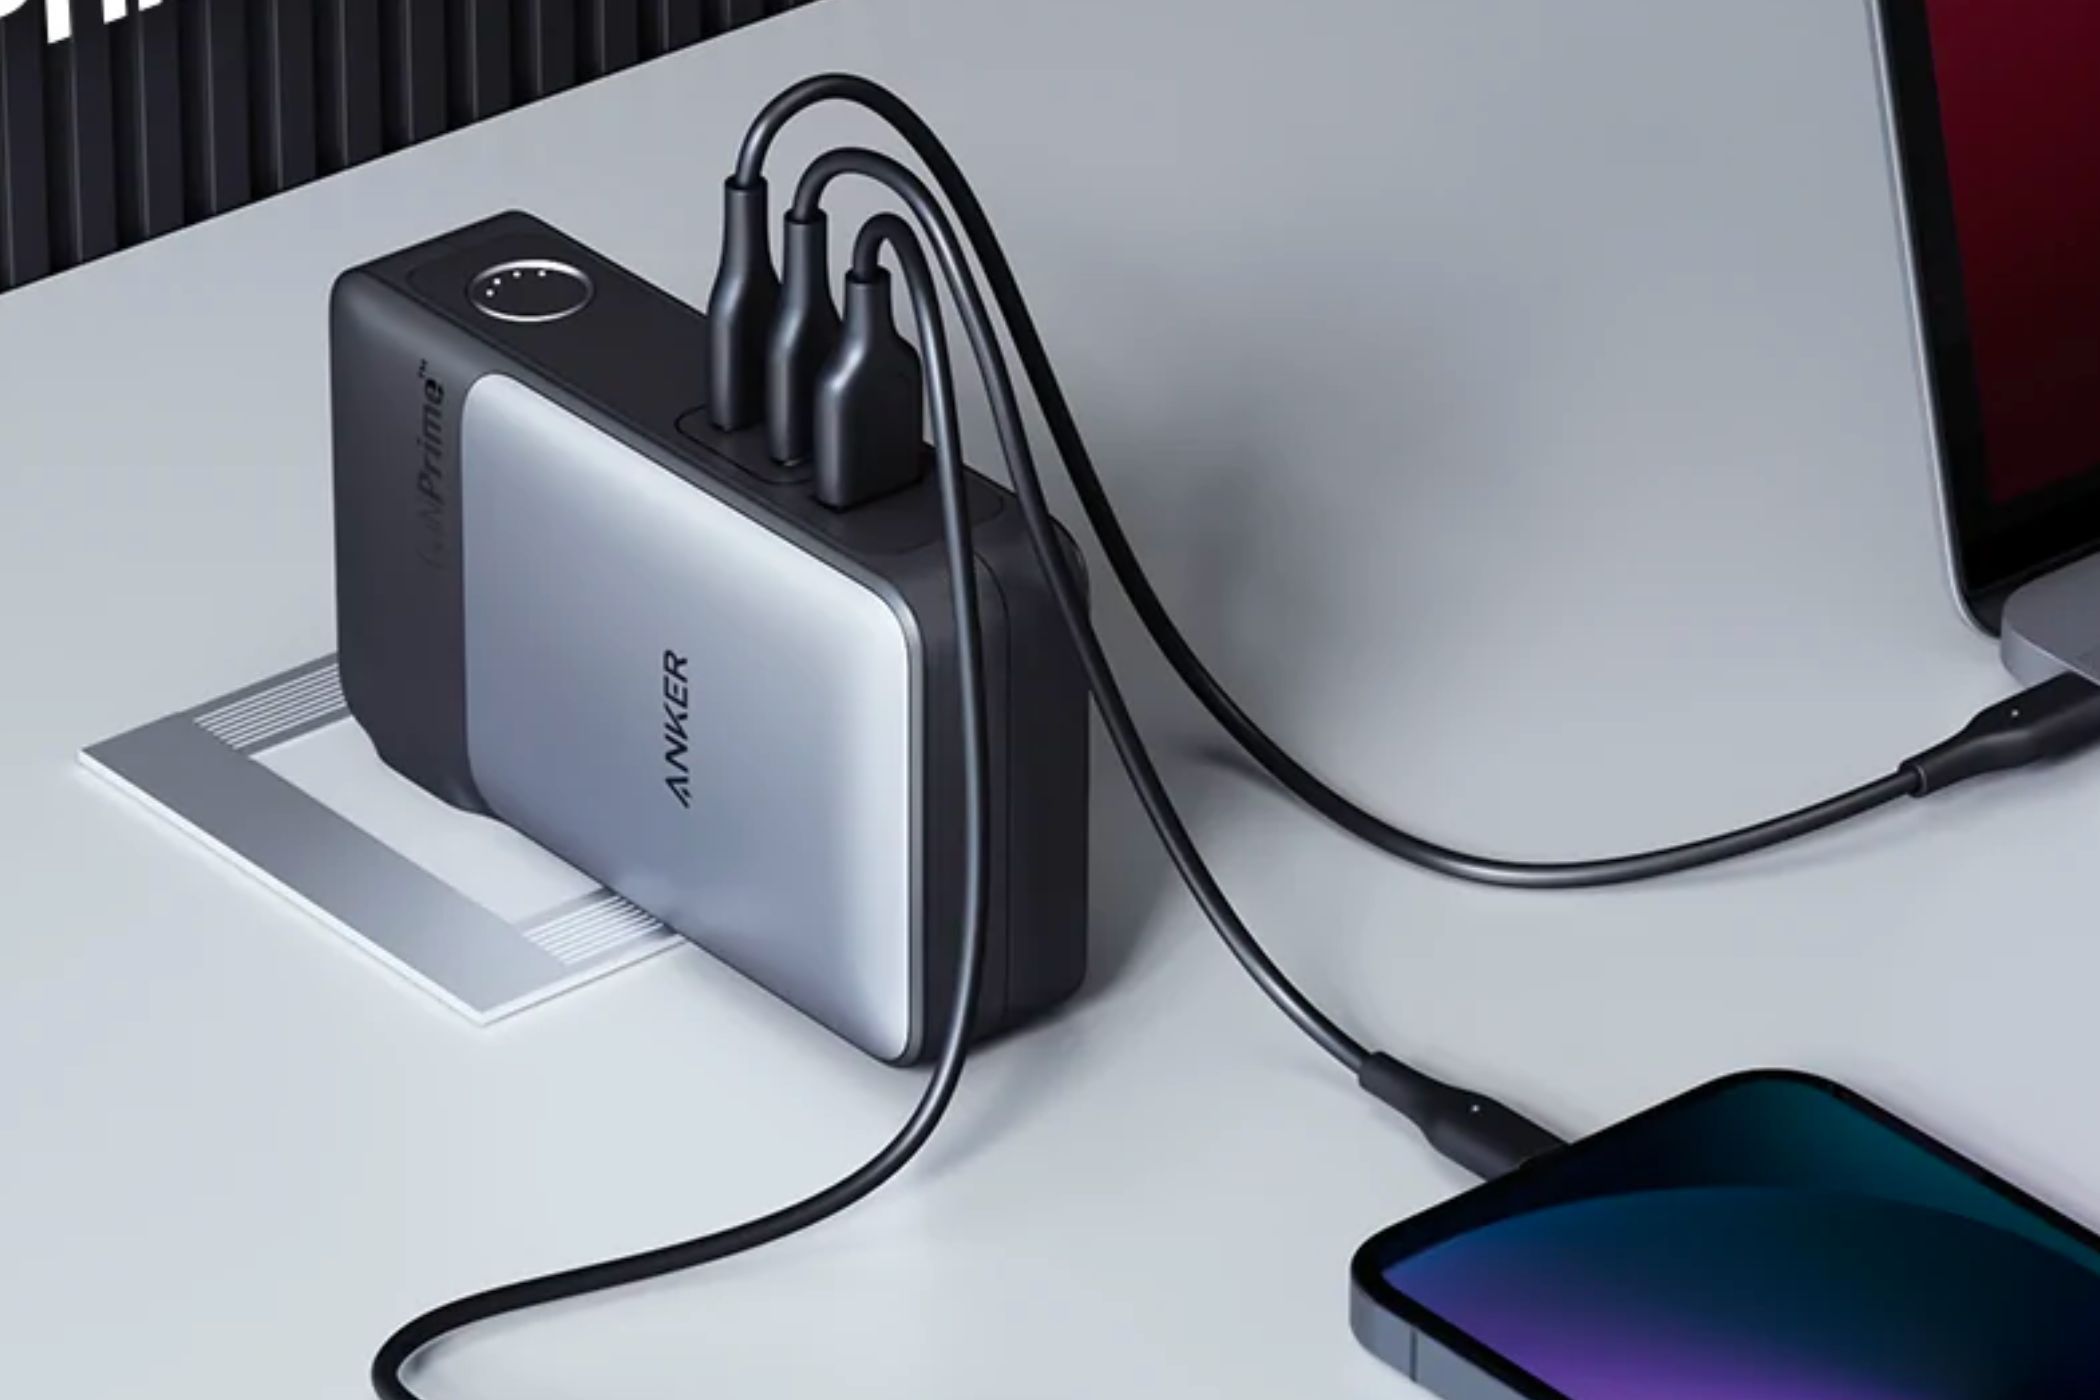 Anker 733 hybrid charger is now 32% off for a limited time